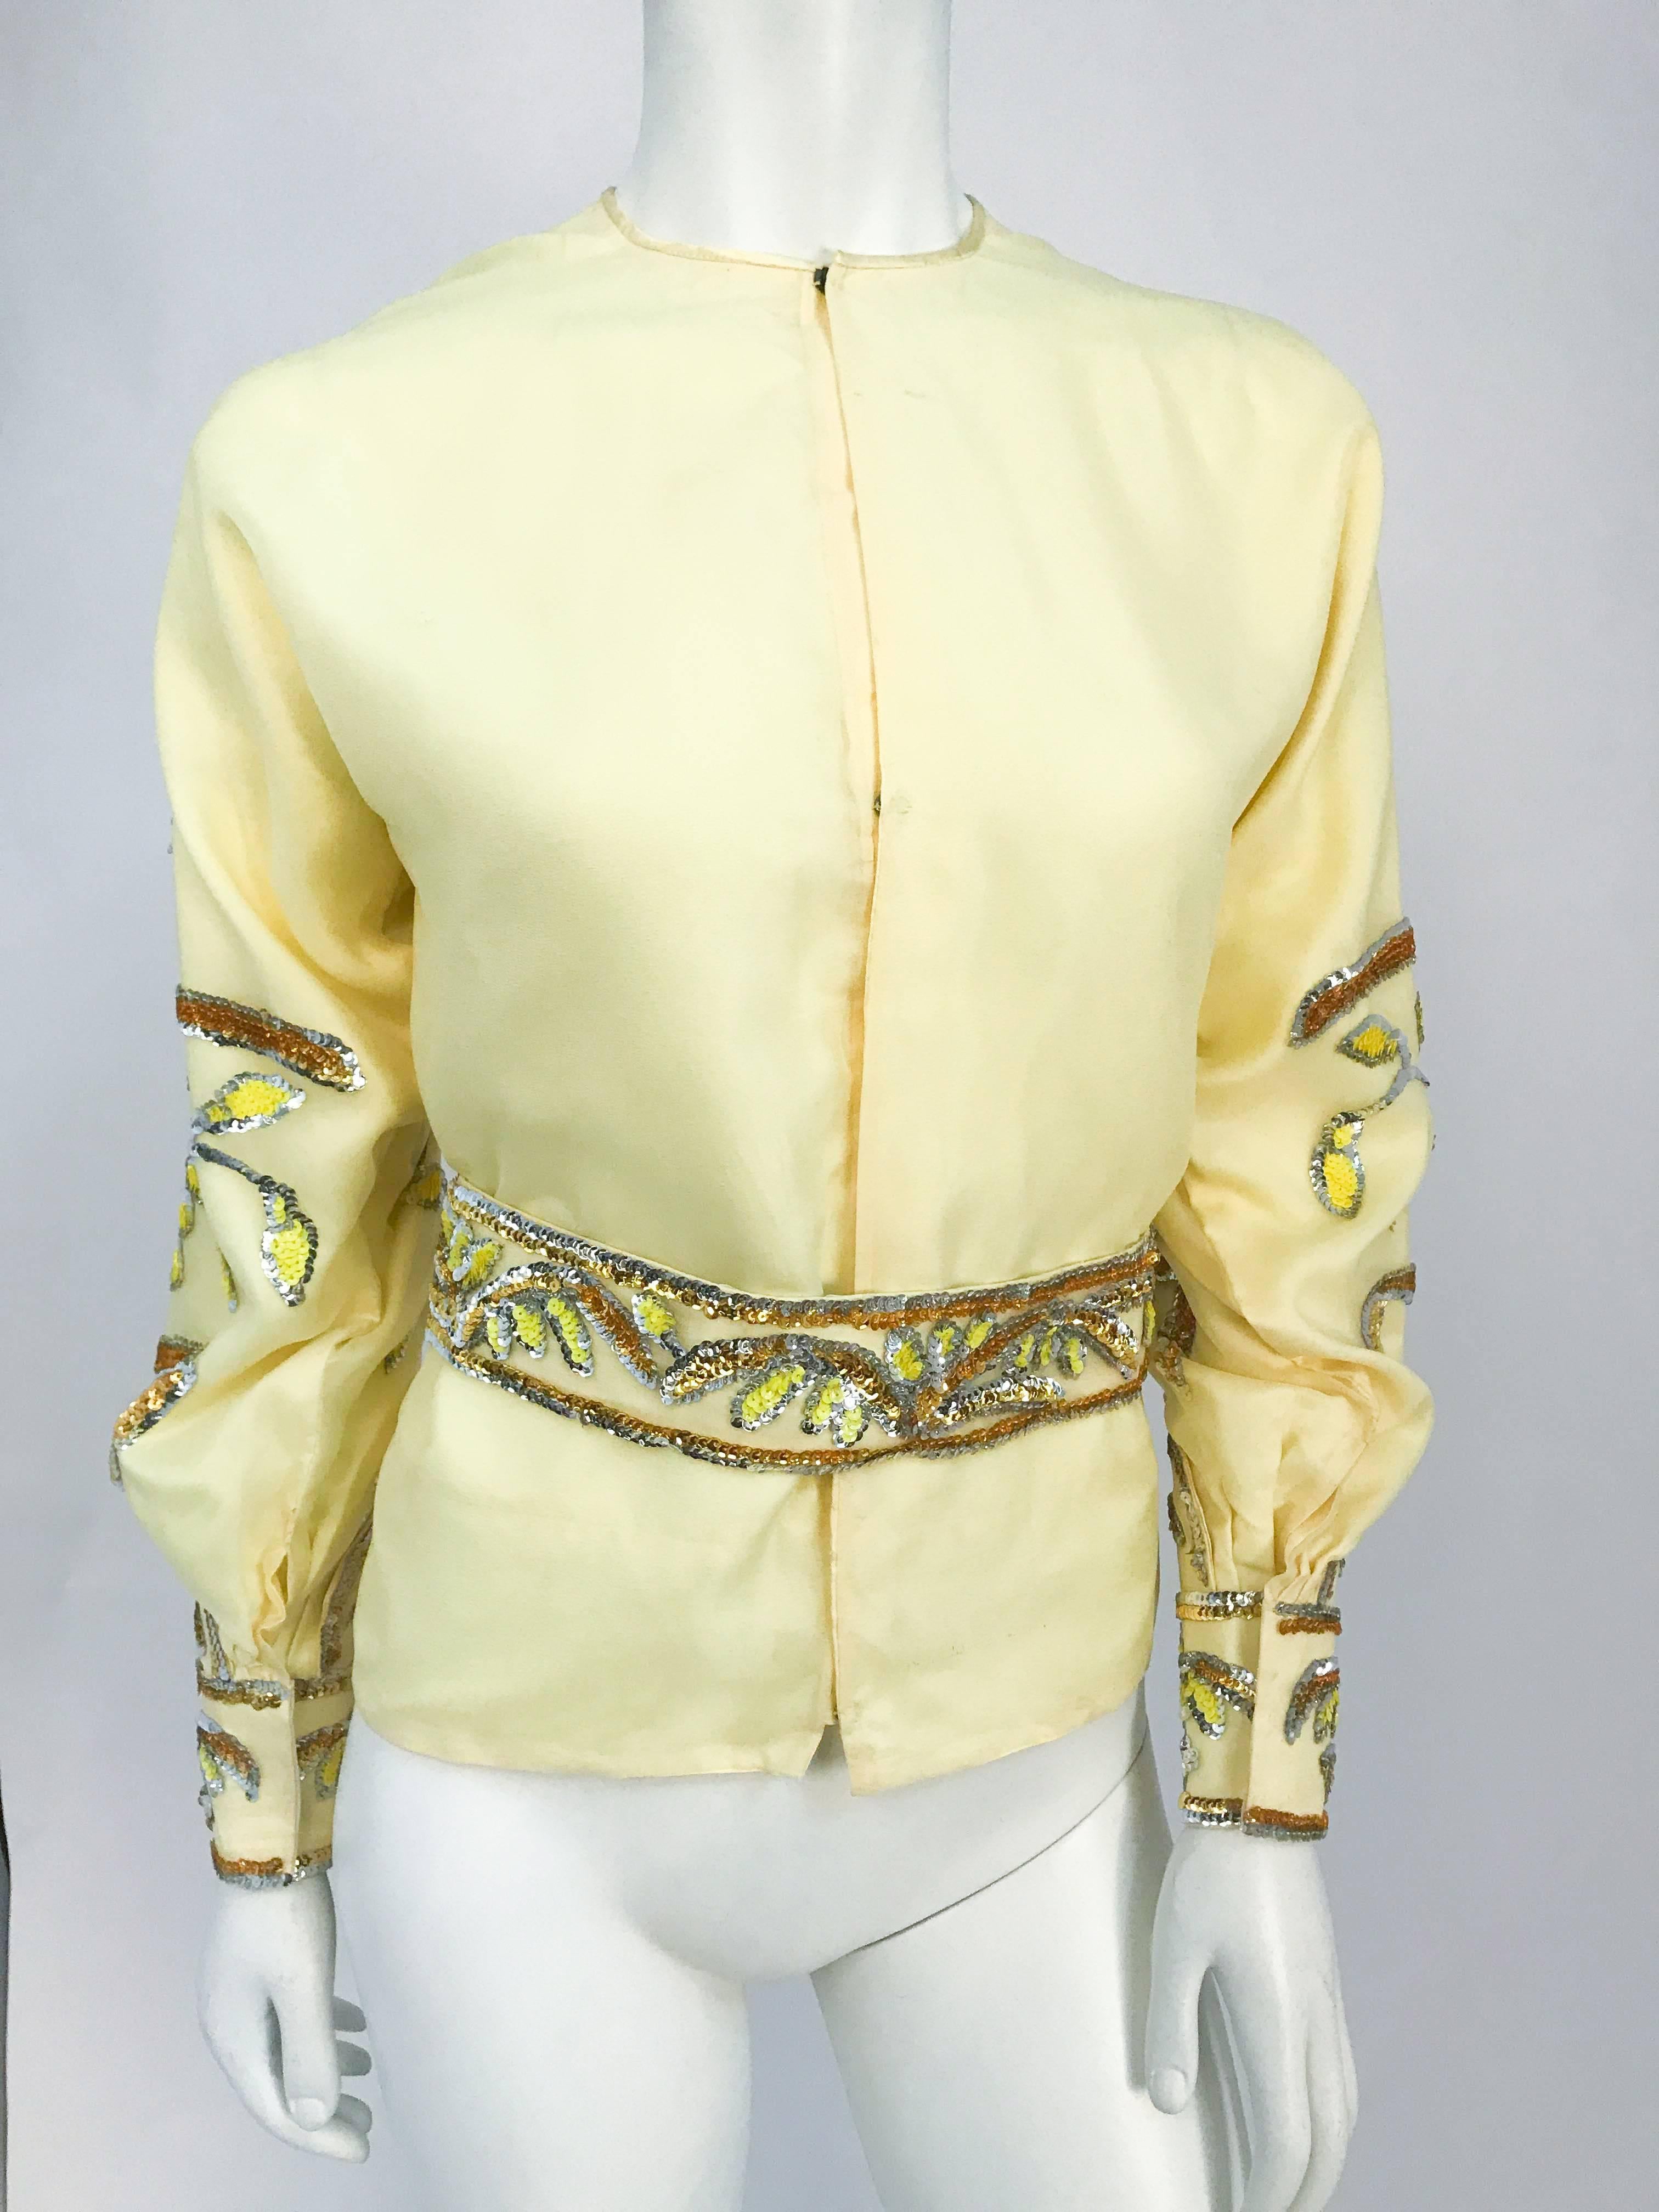 1960s Handmade Yellow Sequin Top and Belt Set with Flared Cuffs. Yellow theatrical costume piece with top adorned with sequin on sleeves, flared cuffs, and matching belt. Snap closure in the back